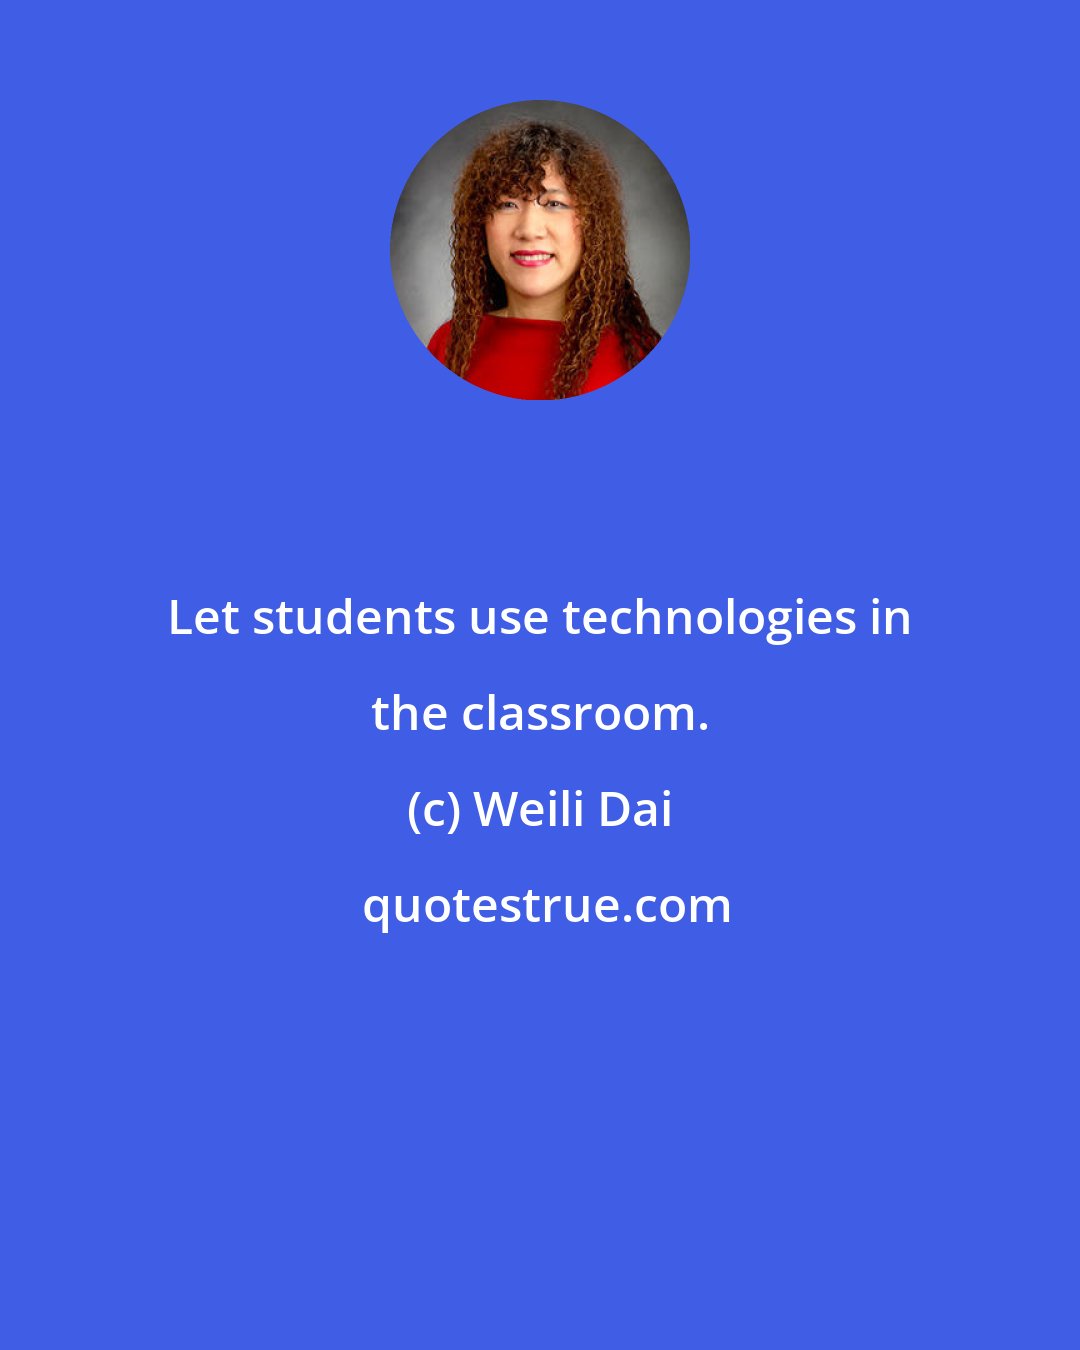 Weili Dai: Let students use technologies in the classroom.